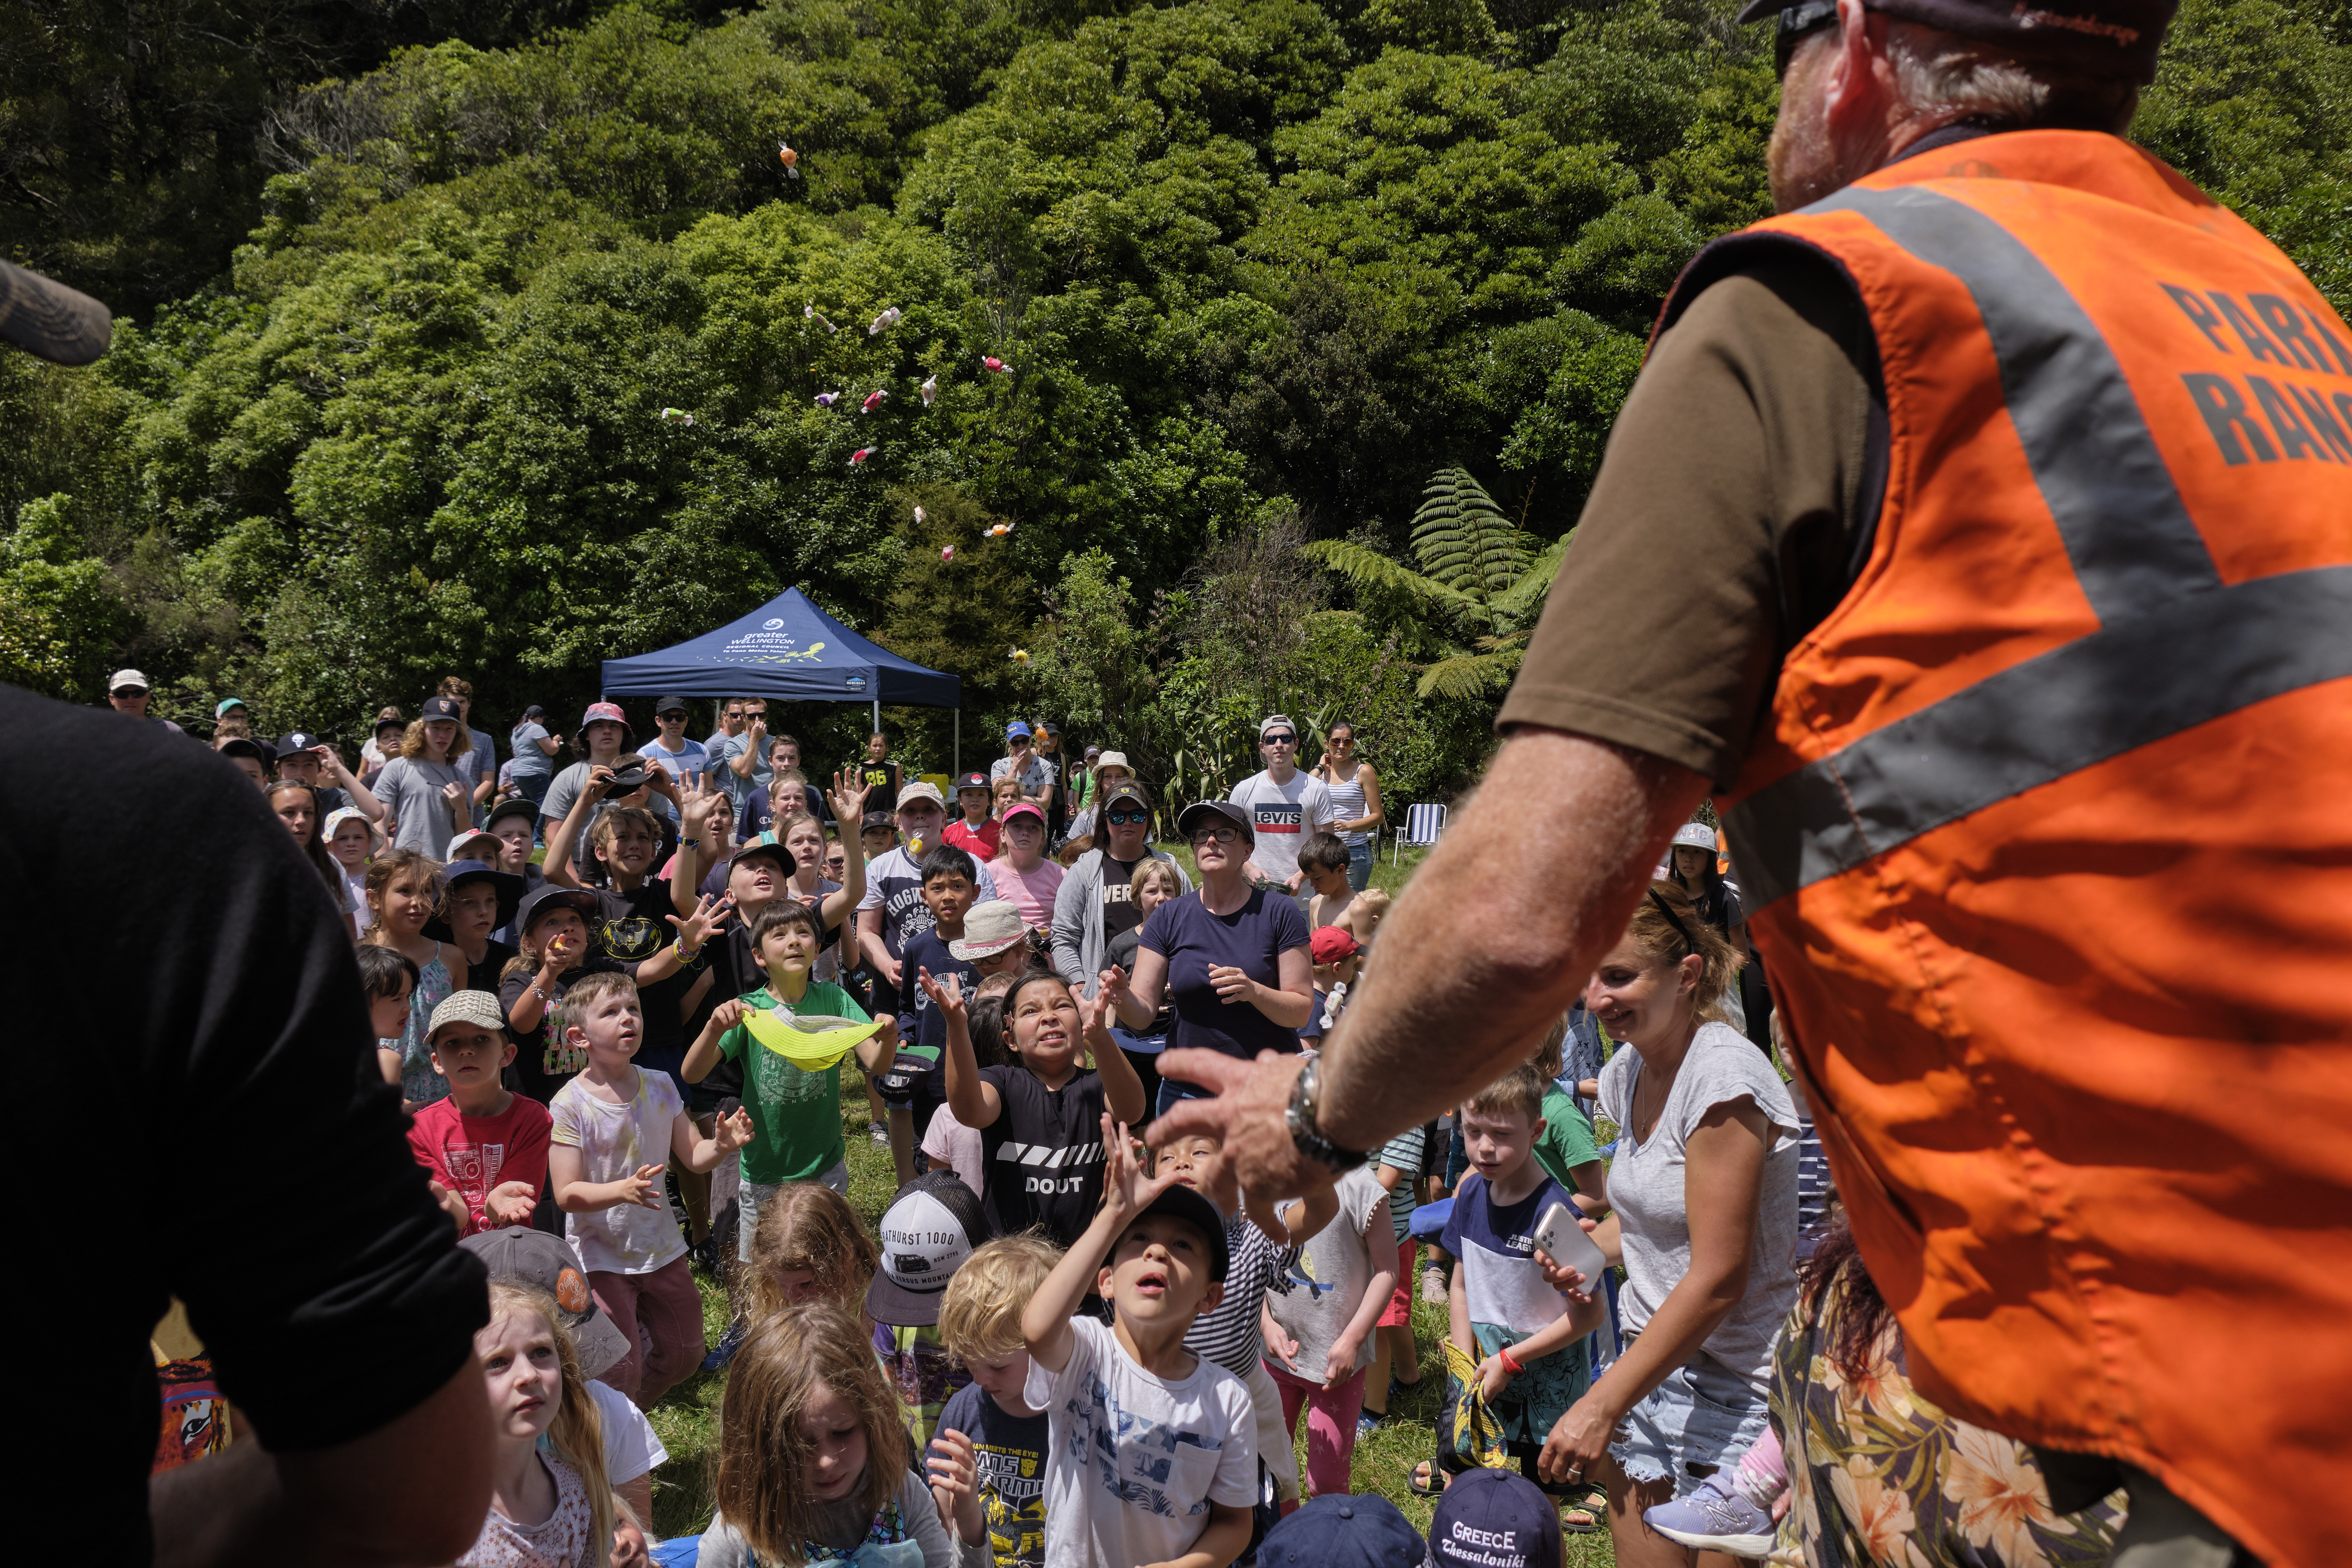 A park ranger tossing lollies into a crowd of children